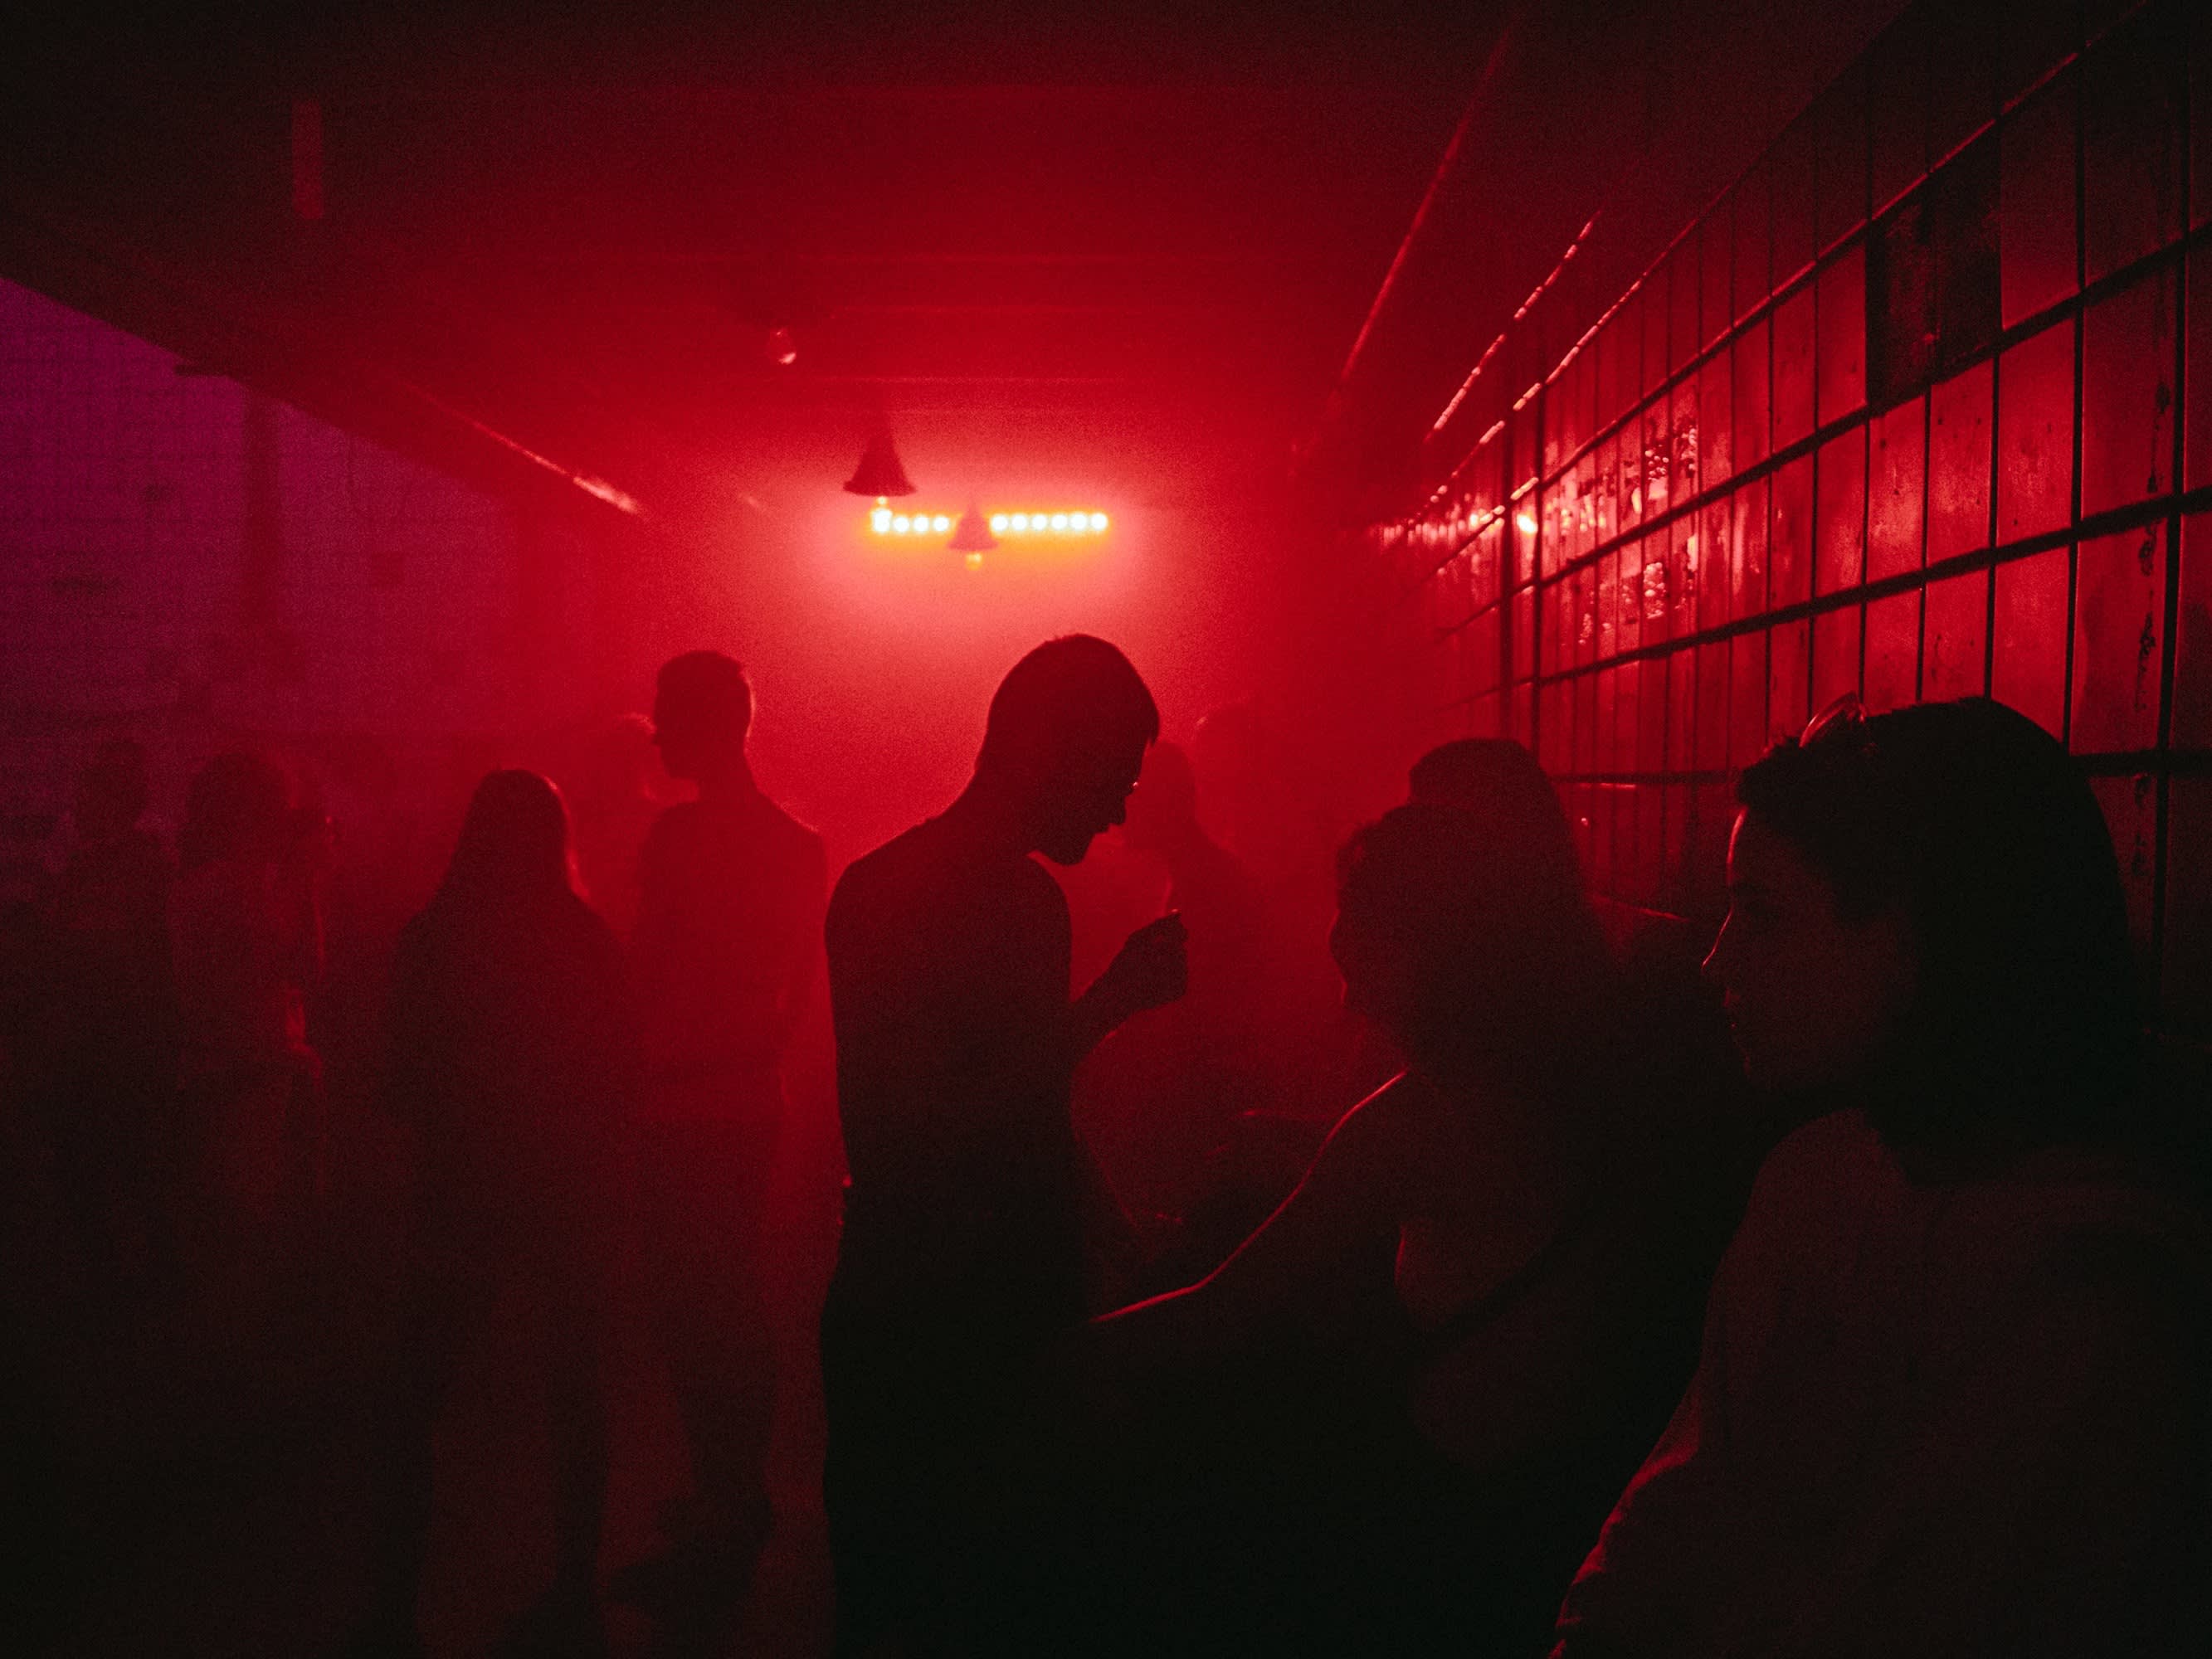 red dark space with people's silhouettes